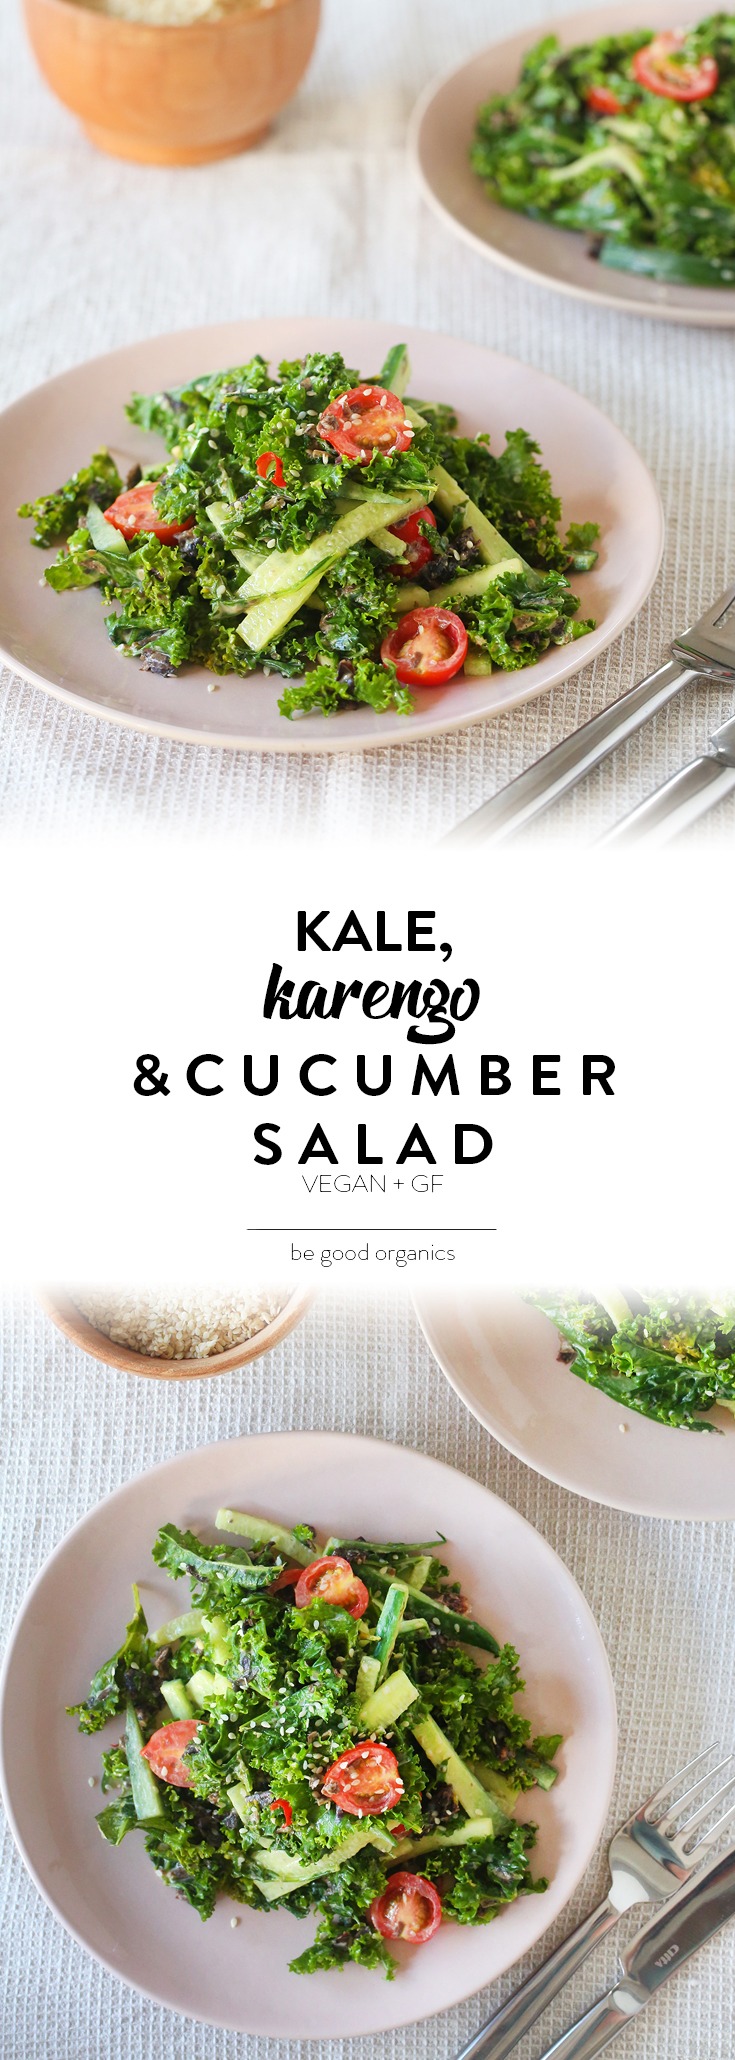 KALE, KARENGO & CUCUMBER SALAD with a delicious japanese inspired sesame seed dressing - vegan, plant-based, dairy free, gluten free, refined sugar free, nut free, healthy, seaweed, lunch, dinner, easy, under 20 minutes, begoodorganics